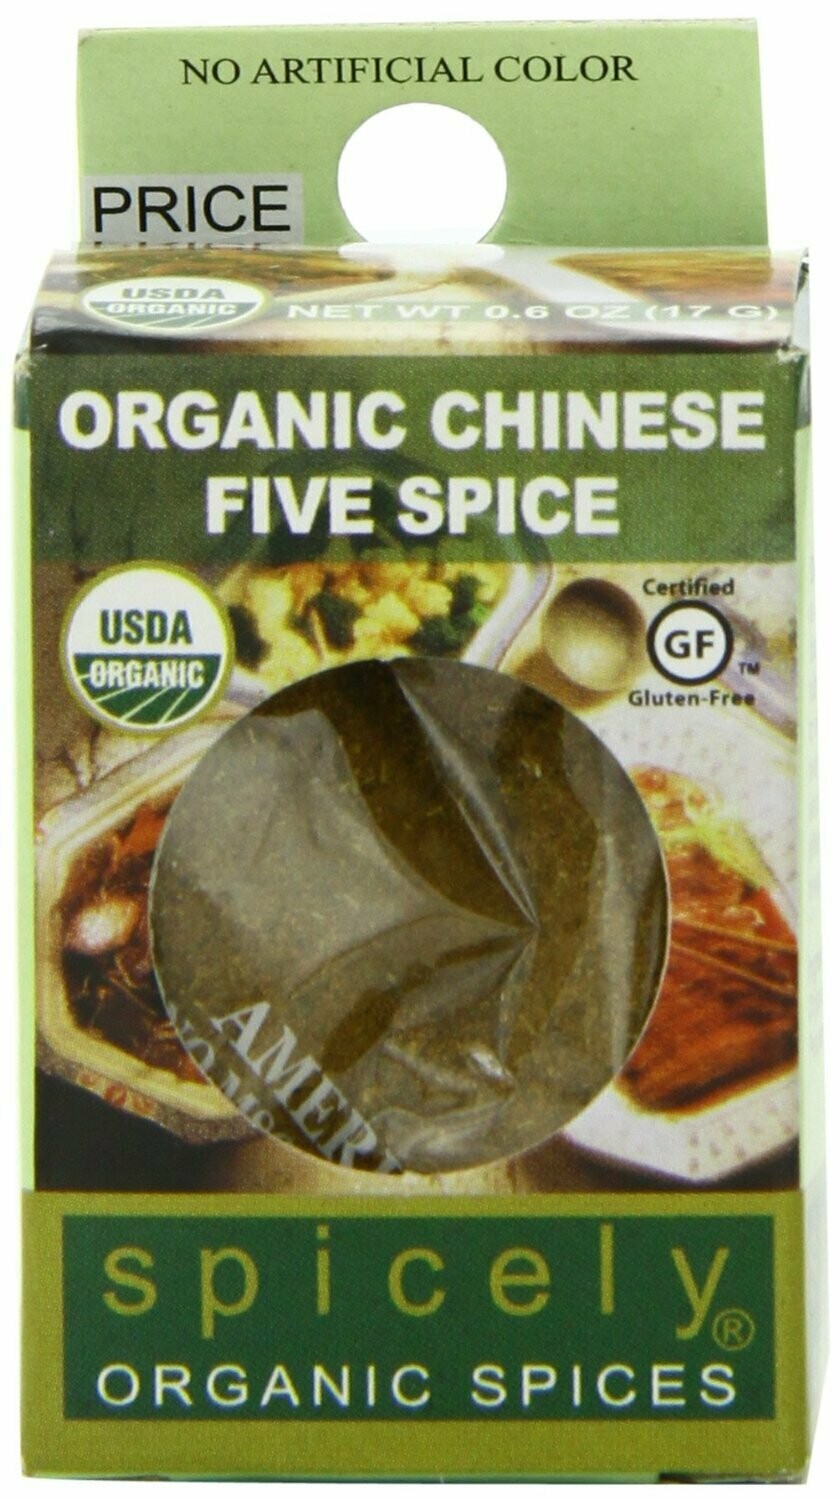 Organic Chinese Five Spice